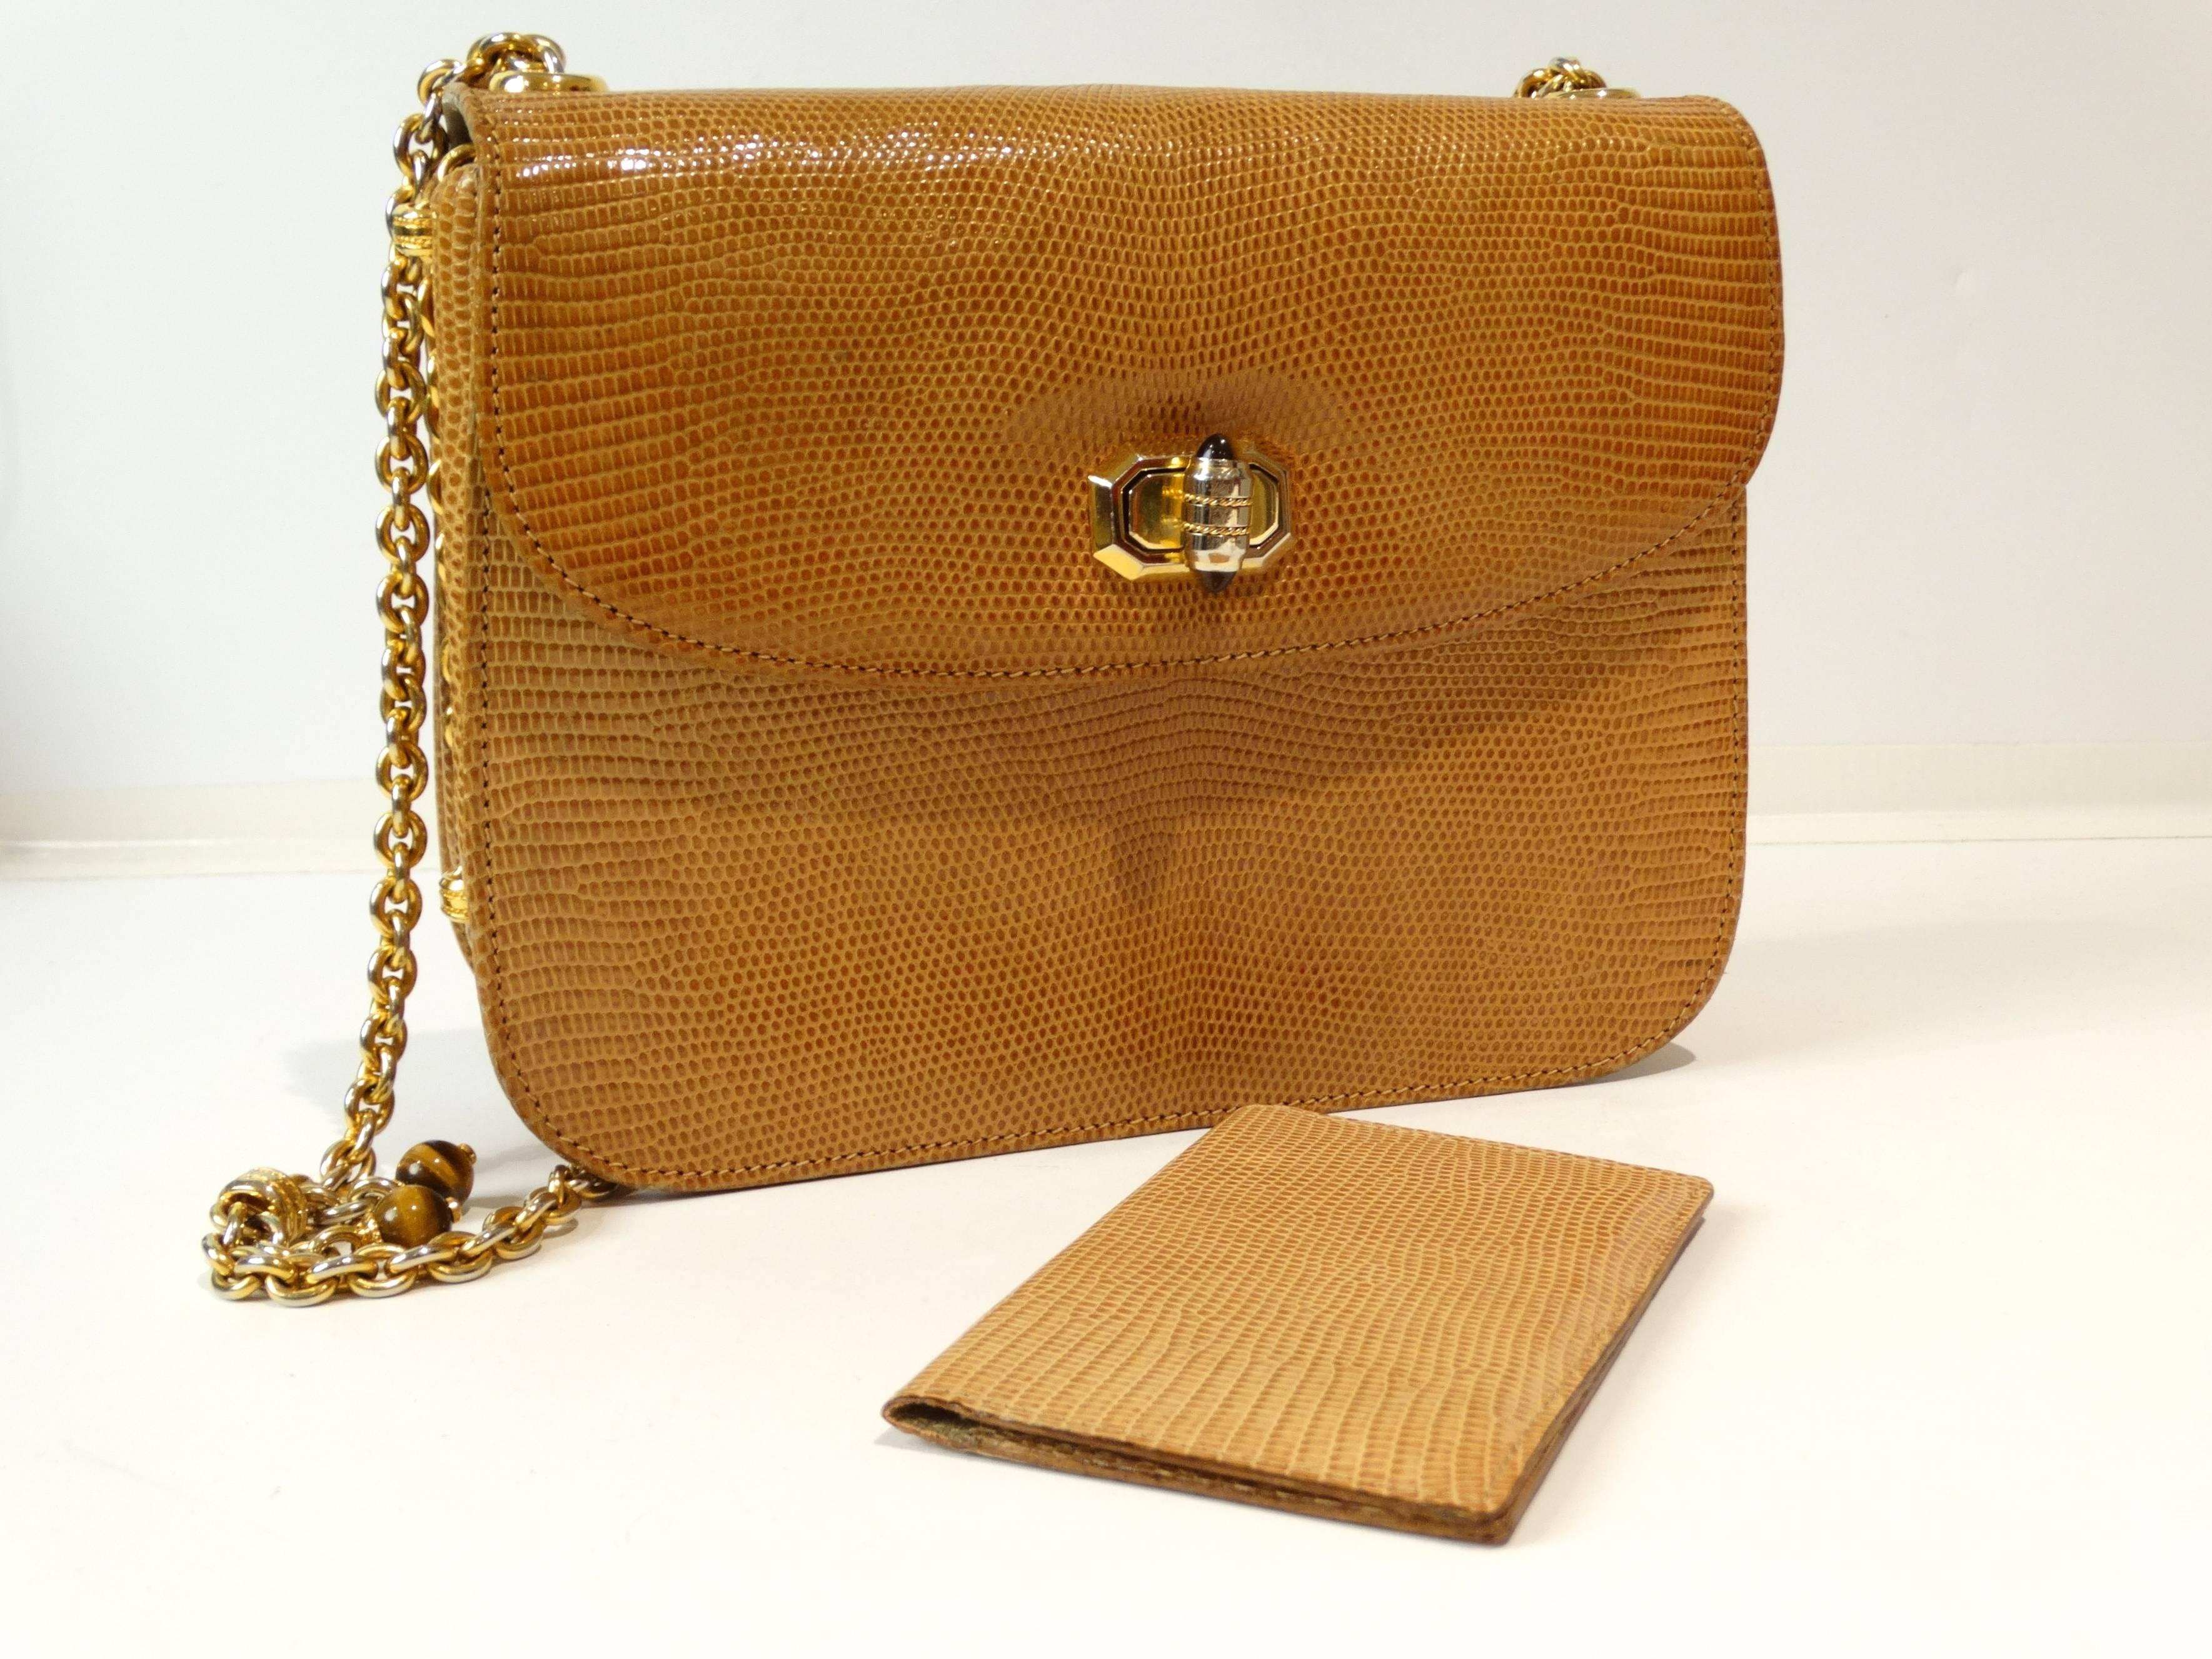 A rare and timeless vintage 1972 Gucci shoulder bag in a tan lizard skin. This handbag has a gold chain with two polished tigers eye stones hanging off the right side of the chain. The handbag has a gold turn closure with pieces of polished tigers